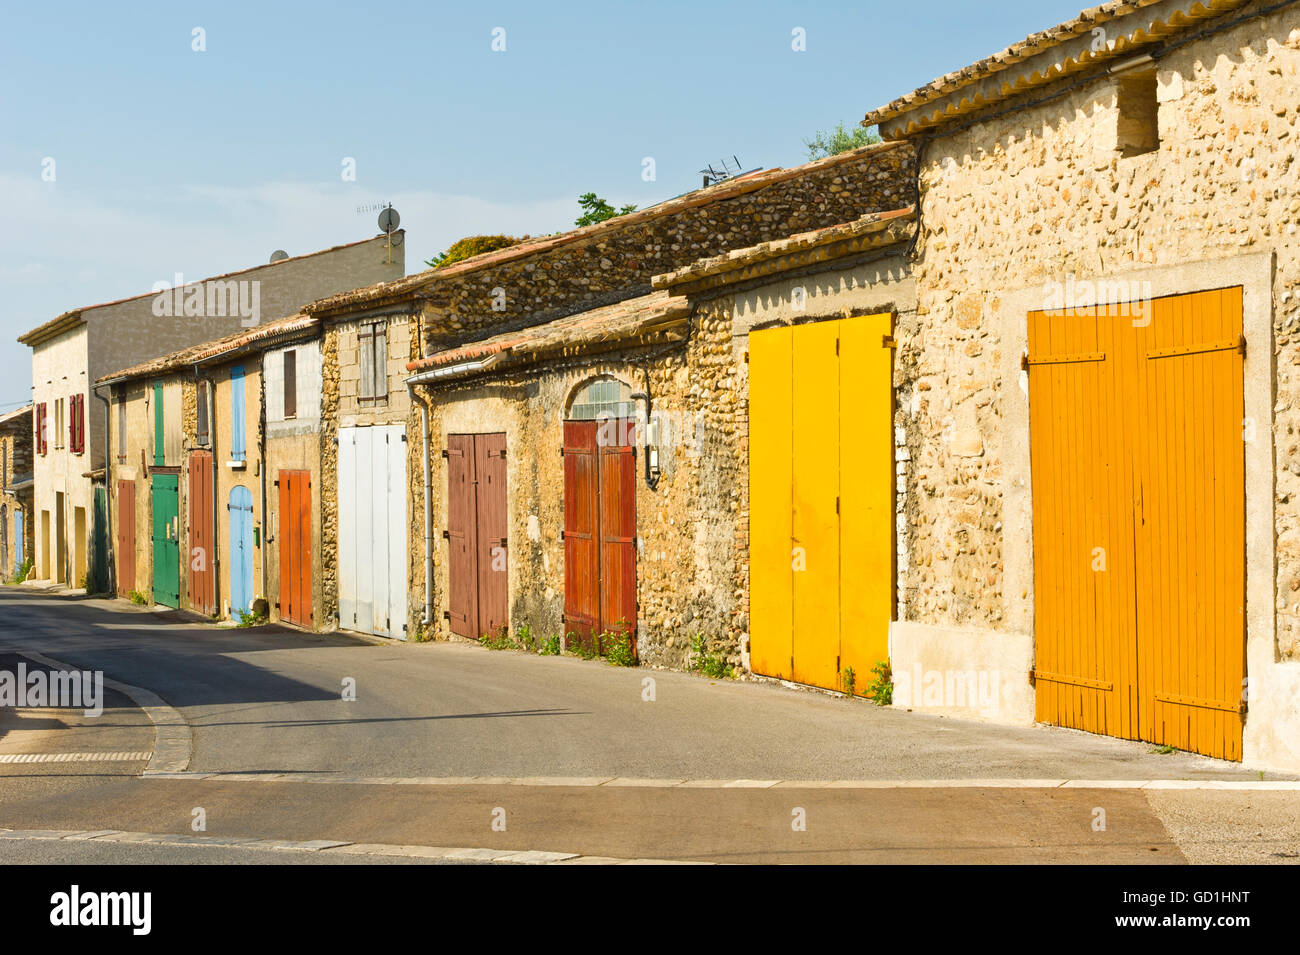 The Village of Riez, near Valensole, Provence, France Stock Photo